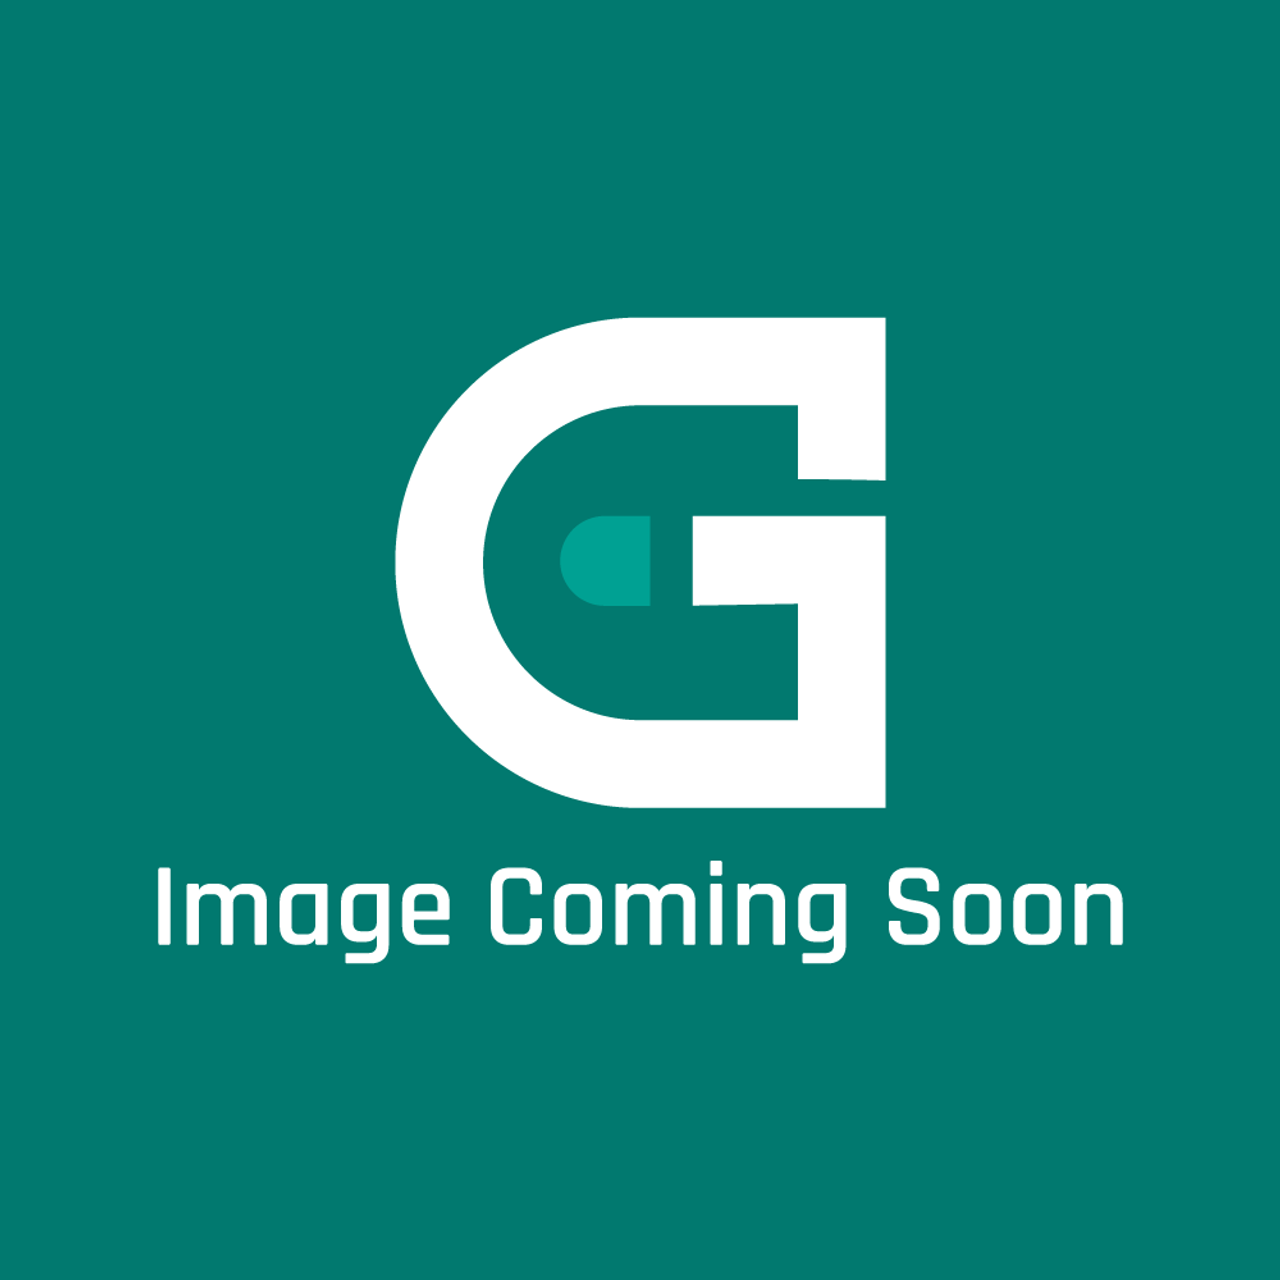 AGA Marvel A2141 - S/A-Baking Oven Heat Conducting Plt - Image Coming Soon!